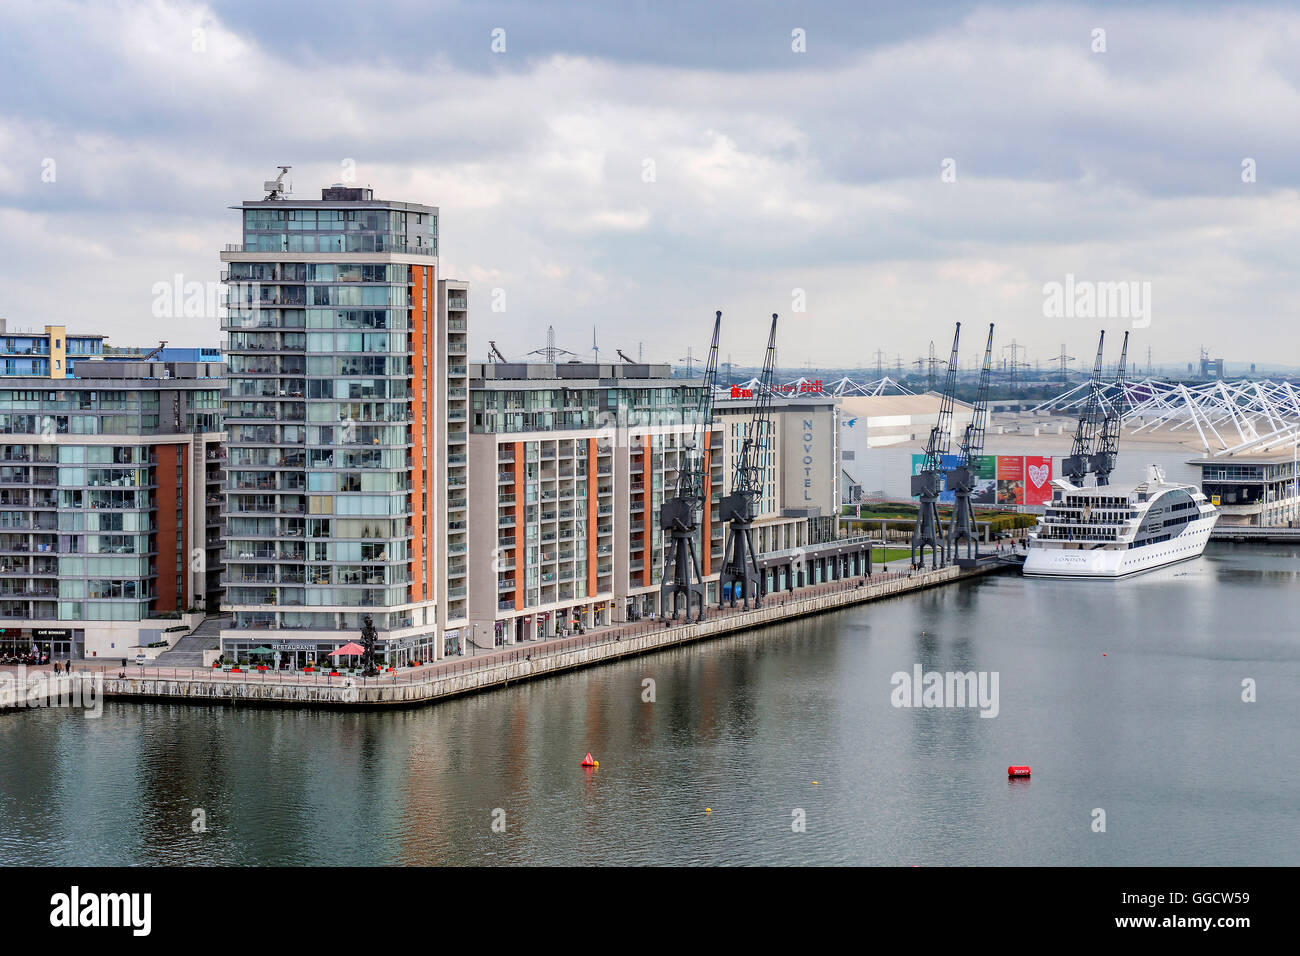 The Emirates Airline cable car in London provides great views of the docklands area of London. Stock Photo